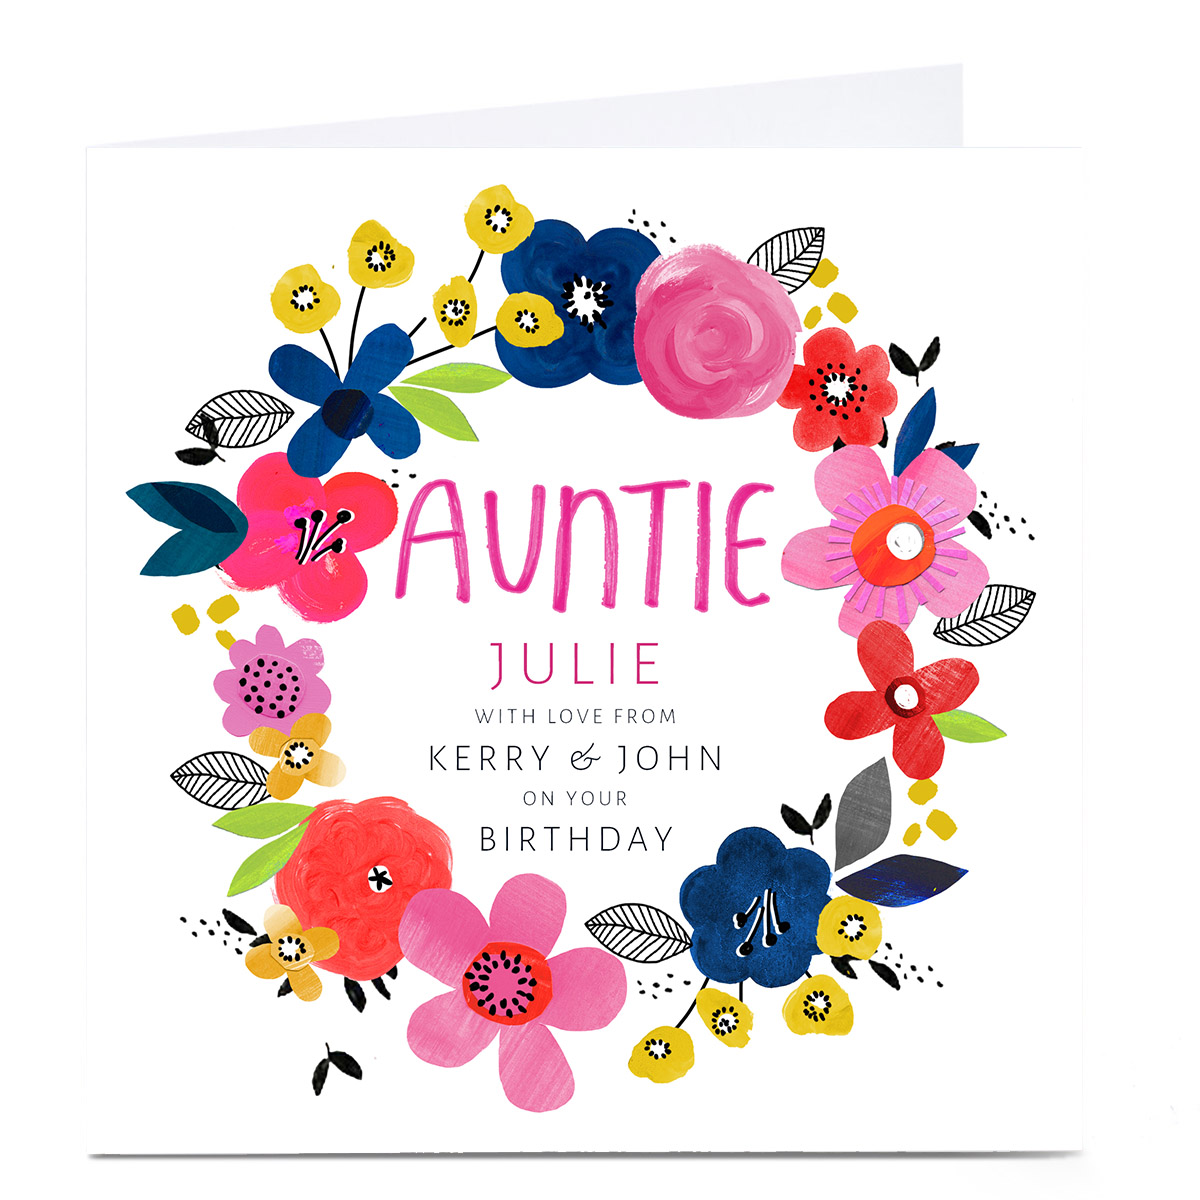 Personalised Kerry Spurling Birthday Card - Floral Wreath, Auntie